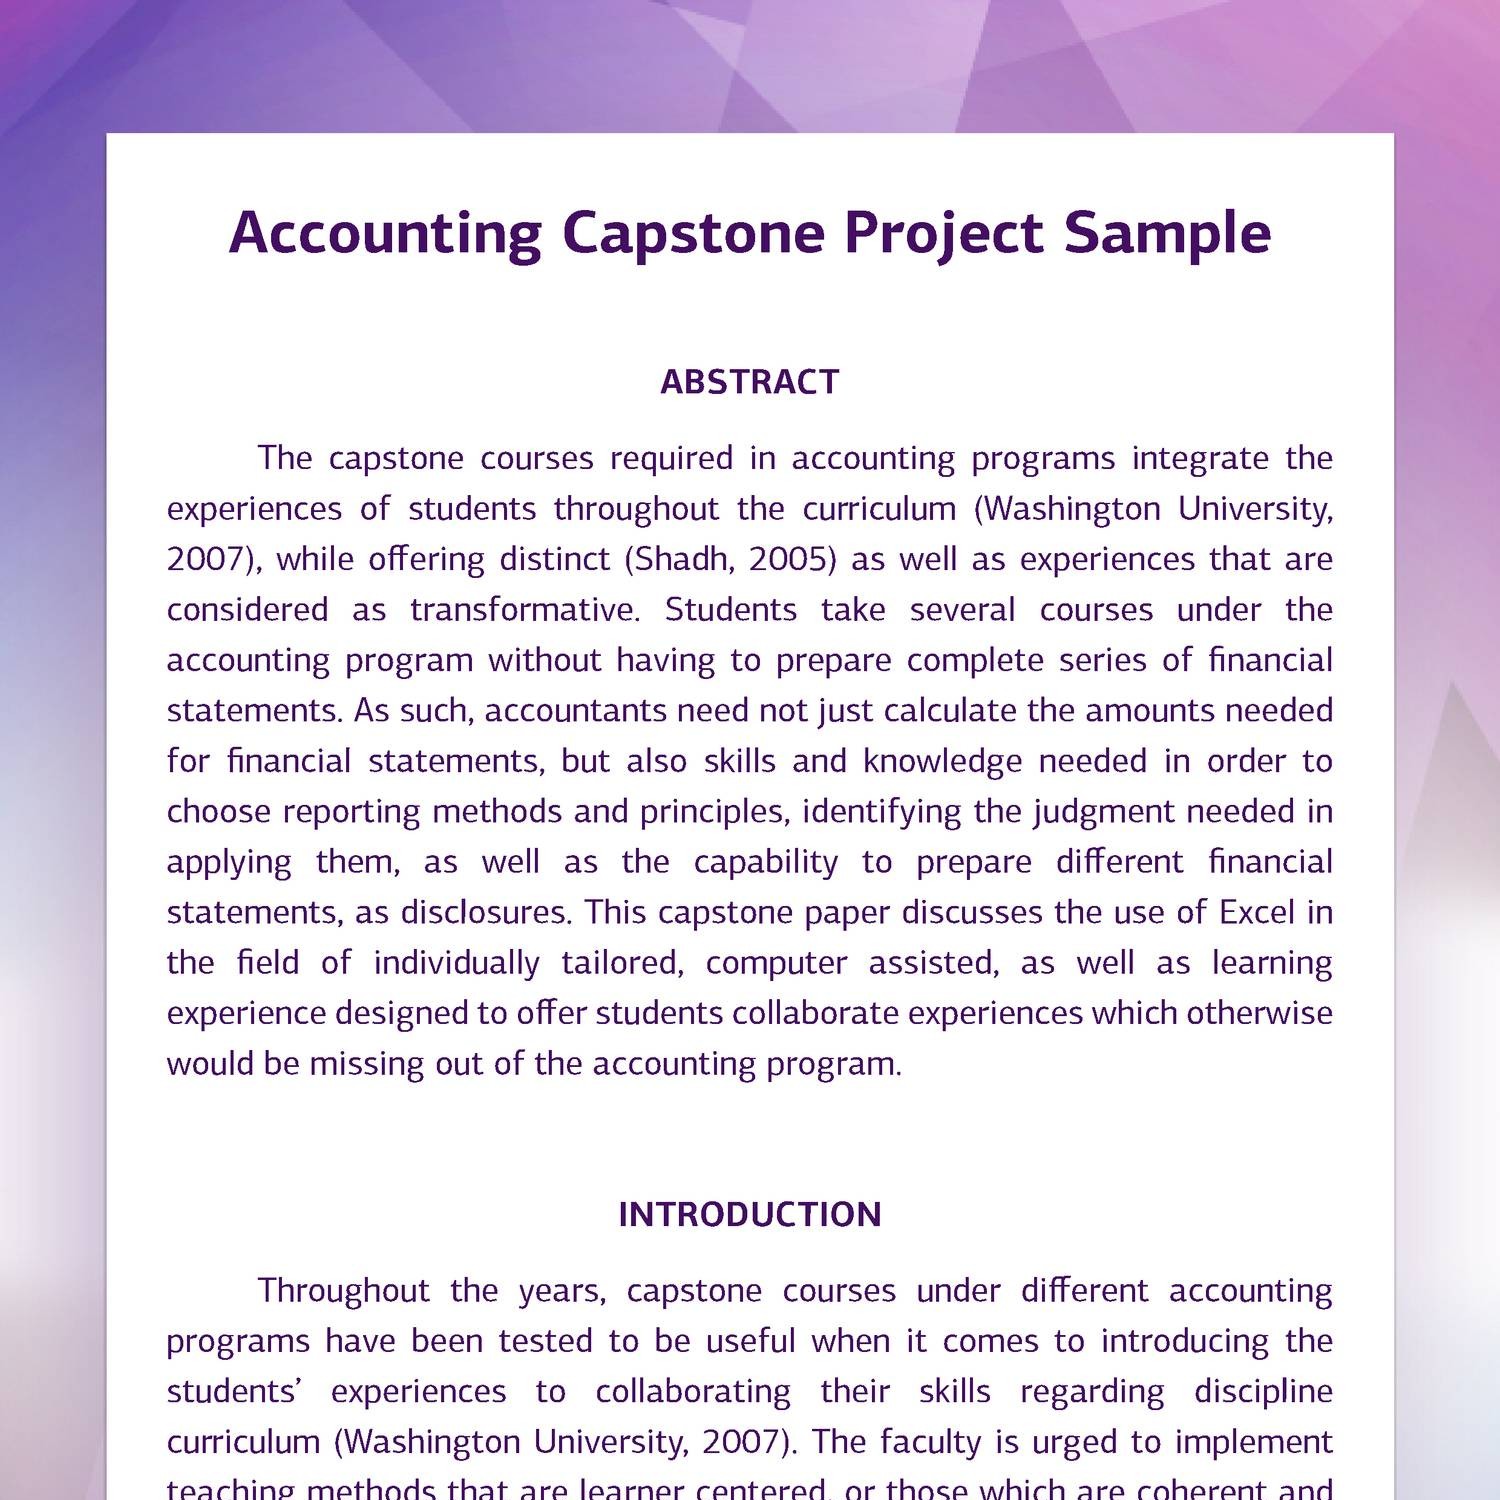 capstone project examples business